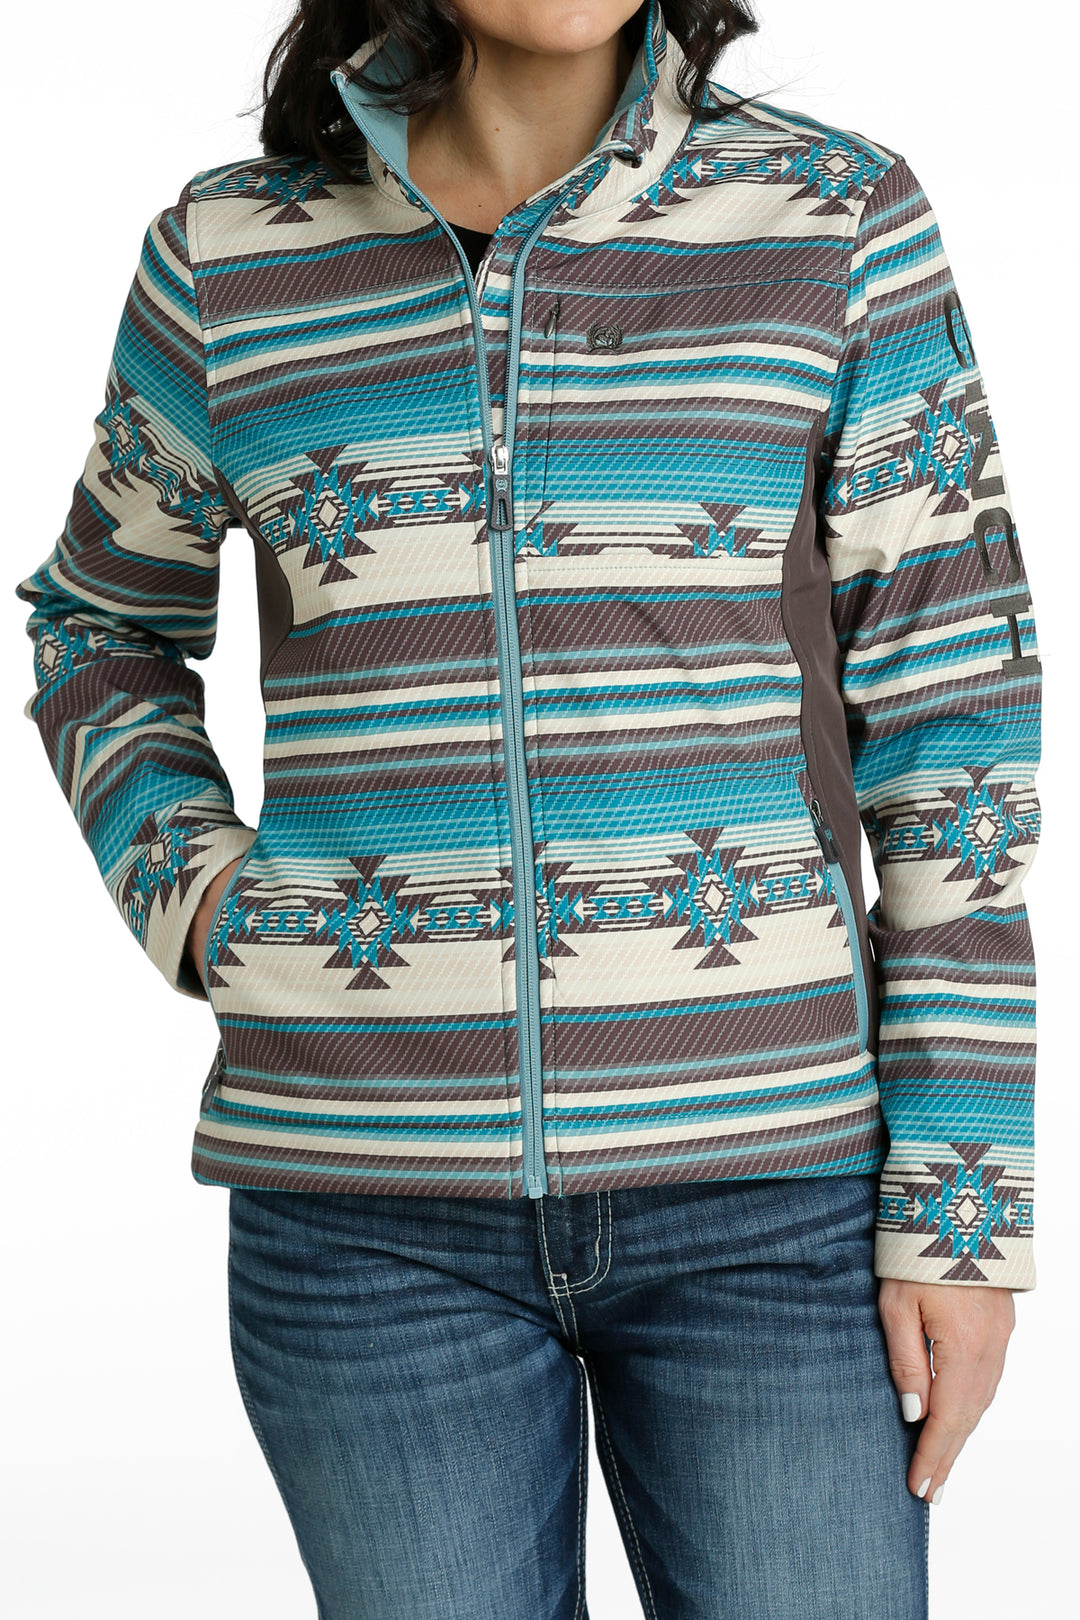 Cinch Women's Concealed Carry Aztec Green Bonded Jacket